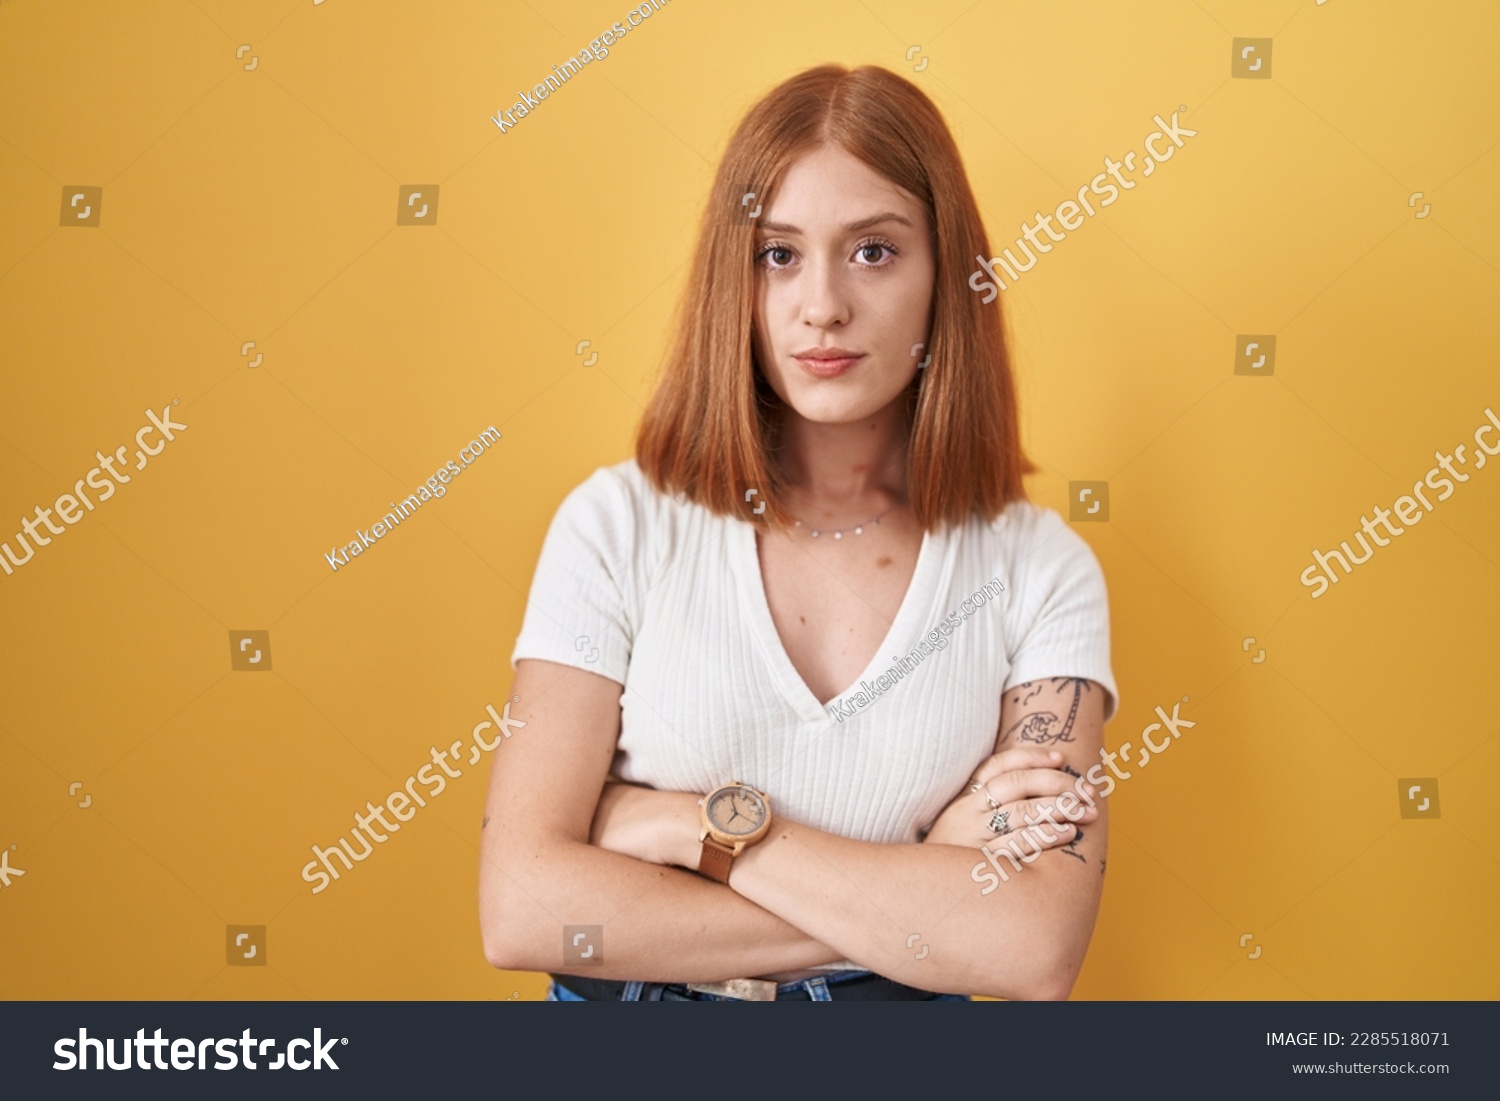 Young redhead woman standing over yellow background skeptic and nervous, disapproving expression on face with crossed arms. negative person.  #2285518071